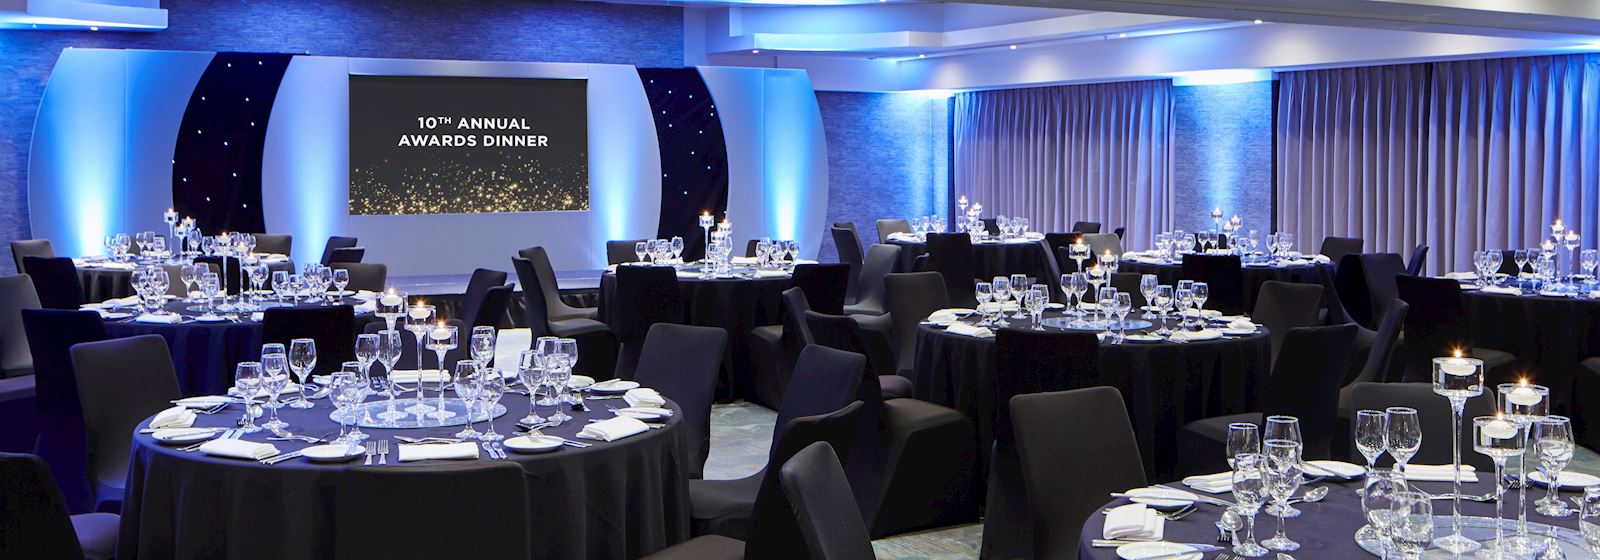 Manchester Airport Marriott Hotel Events